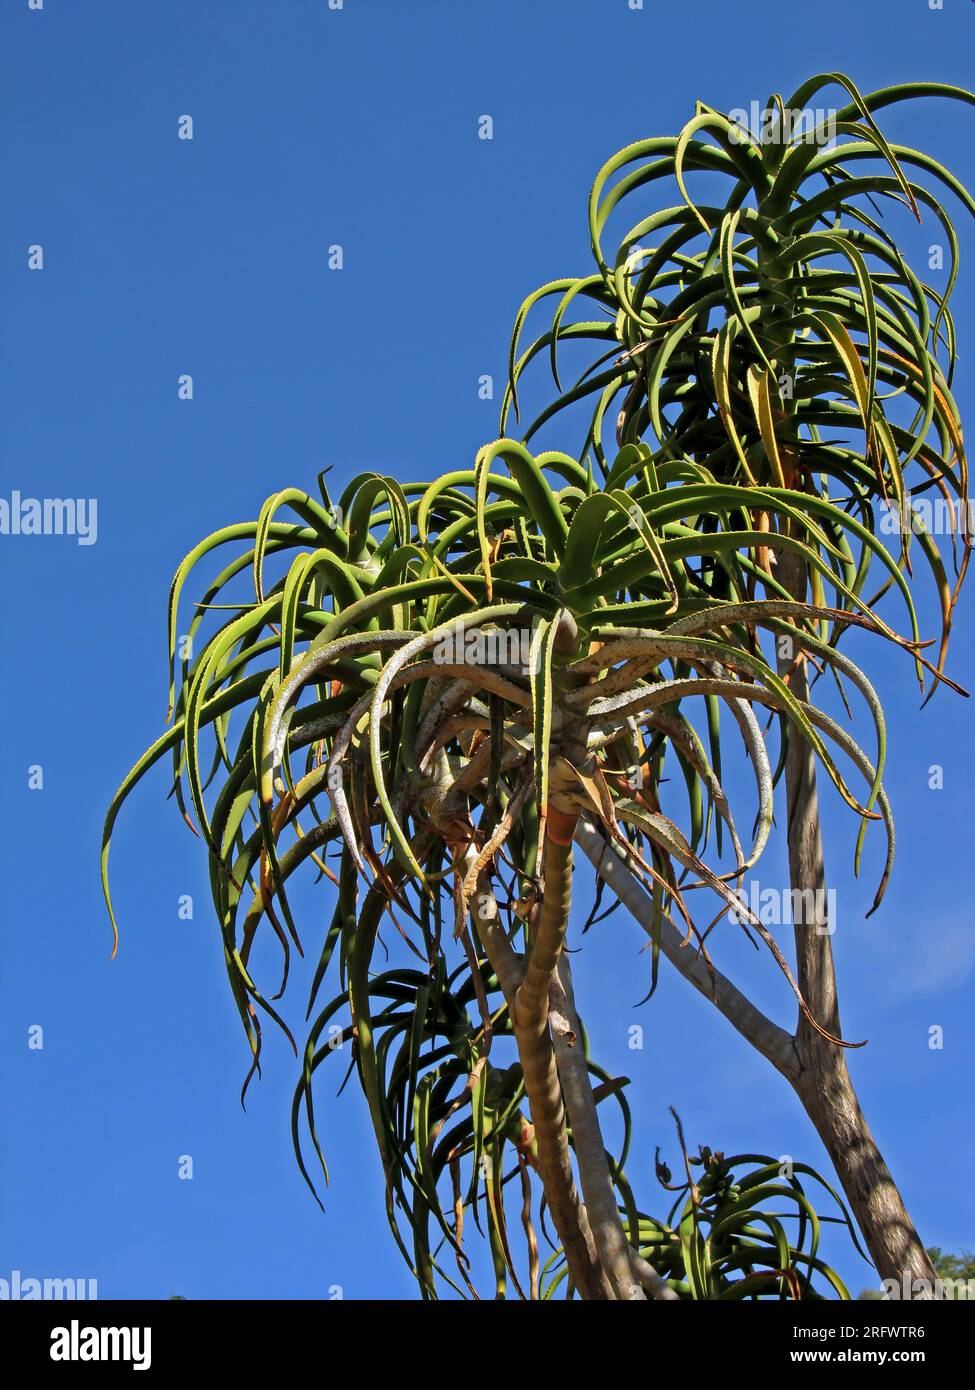 The rosette leaves of a Tree Aloe, Aloidendron barberae, against a bright blue sky Stock Photo